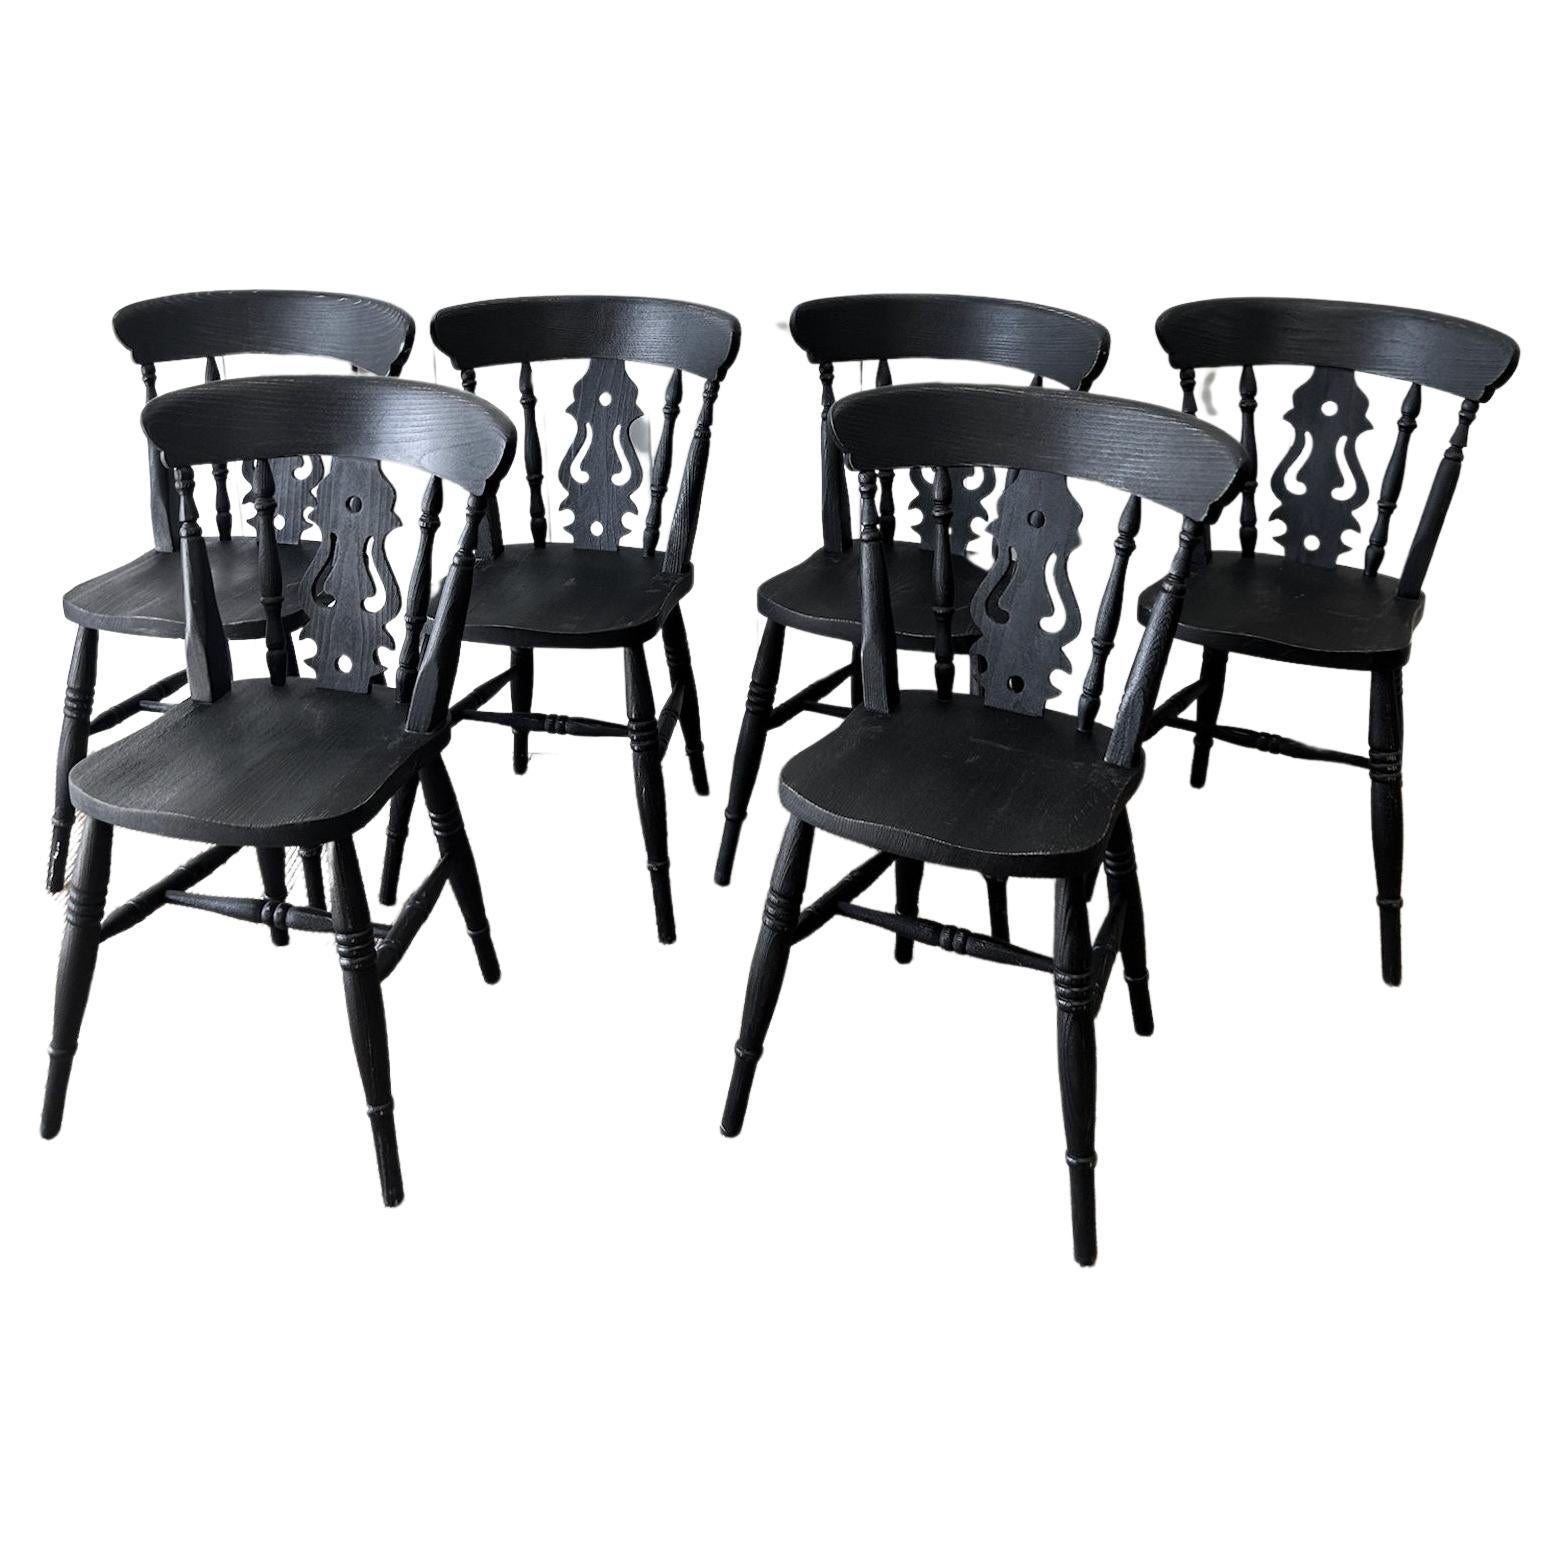 A Vintage Set of 6 Fiddleback Chairs Painted Black For Sale